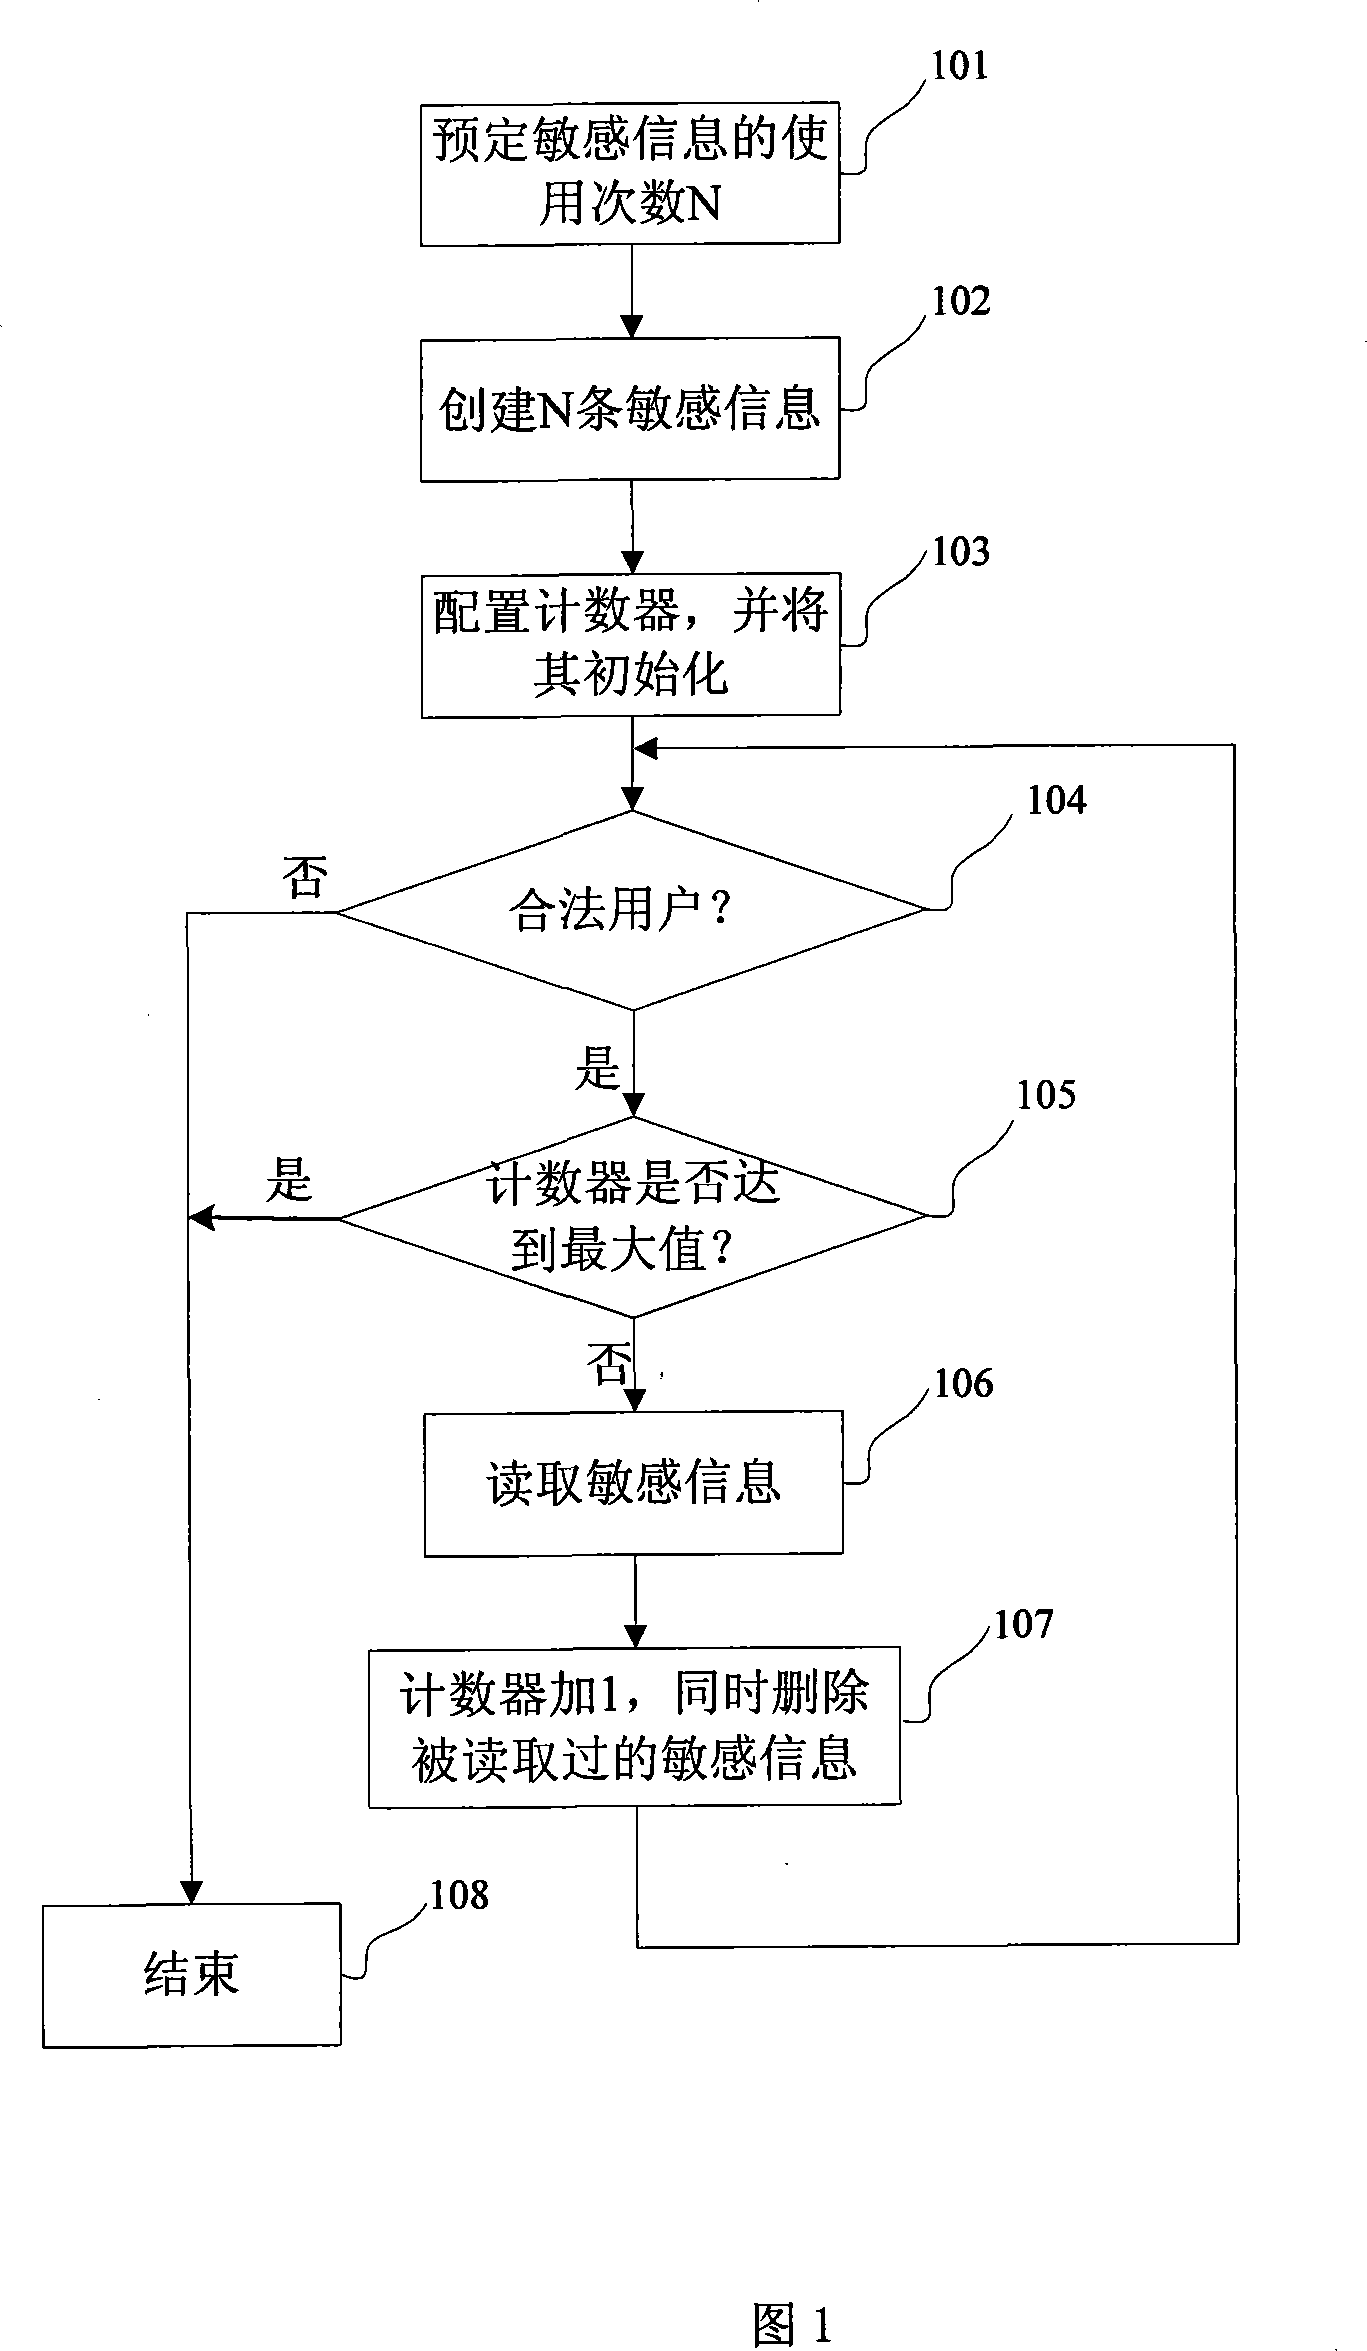 Method and storage device for limiting read of sensitive information